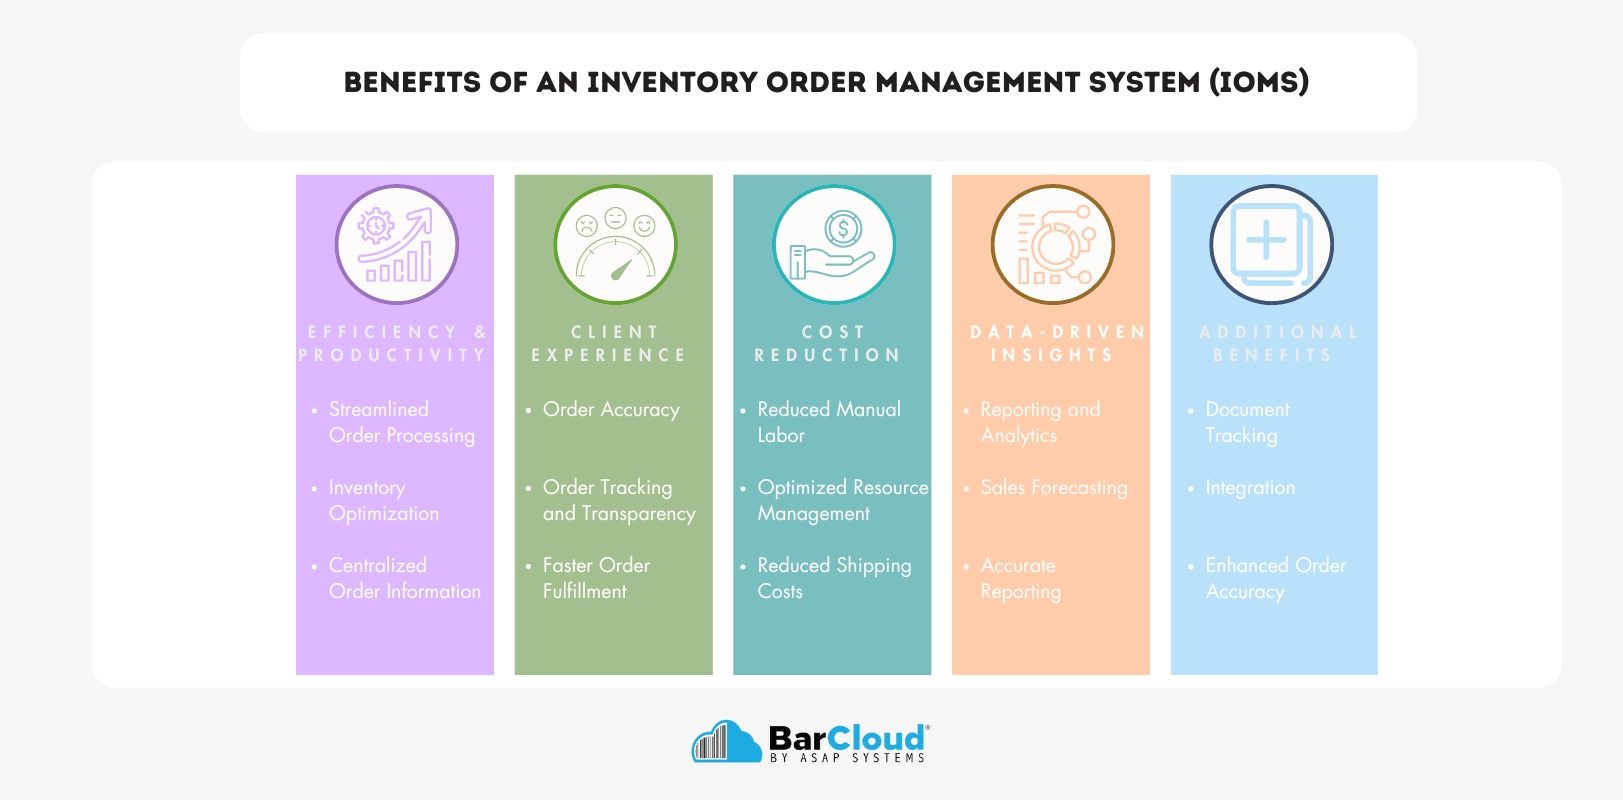 Benefits of an Inventory Order Management System (IOMS)